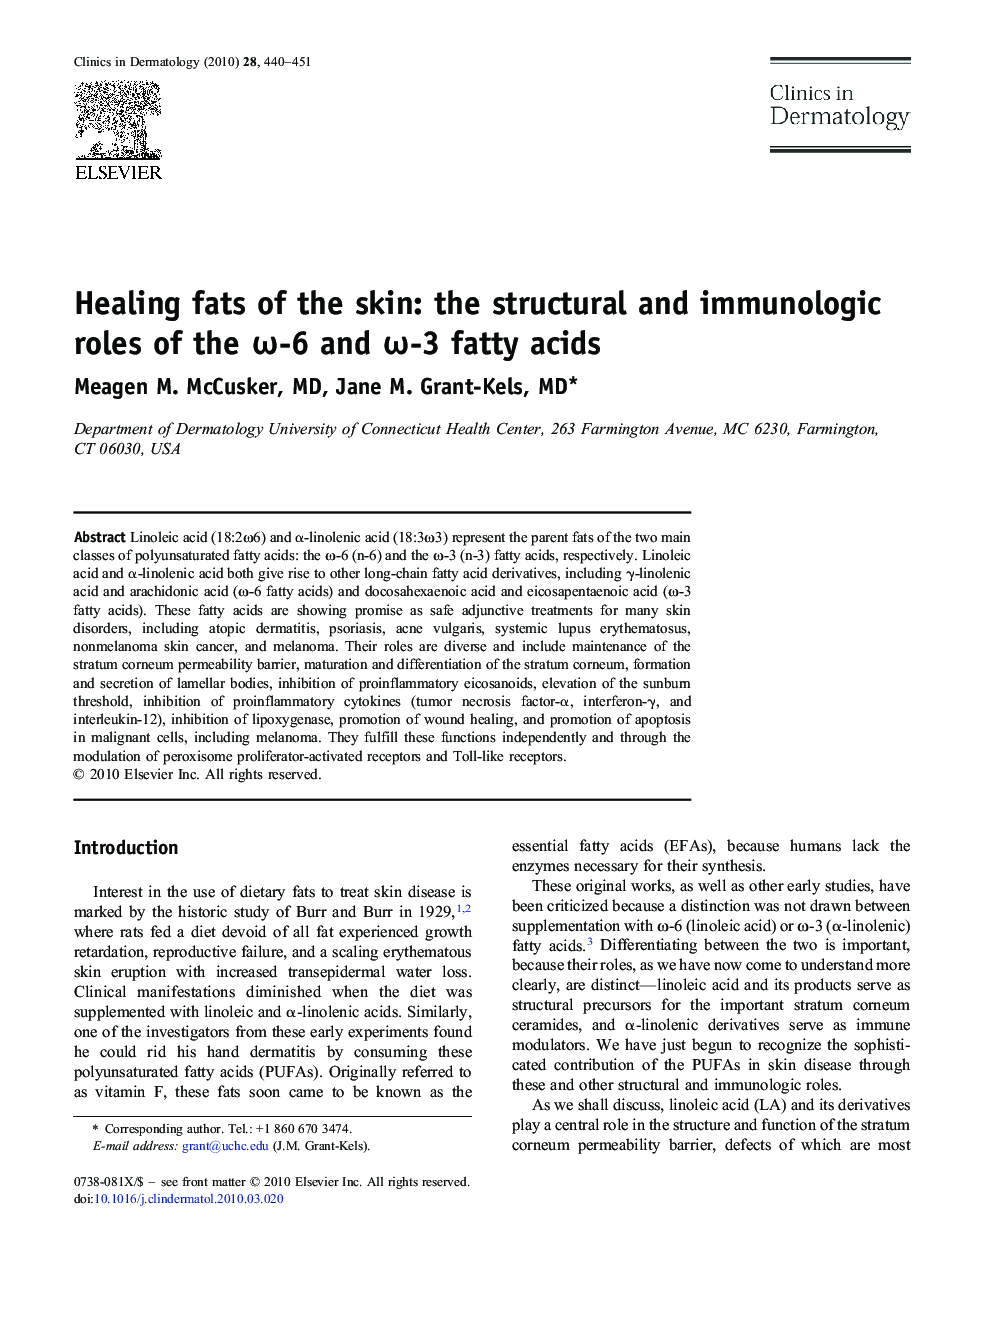 Healing fats of the skin: the structural and immunologic roles of the ω-6 and ω-3 fatty acids